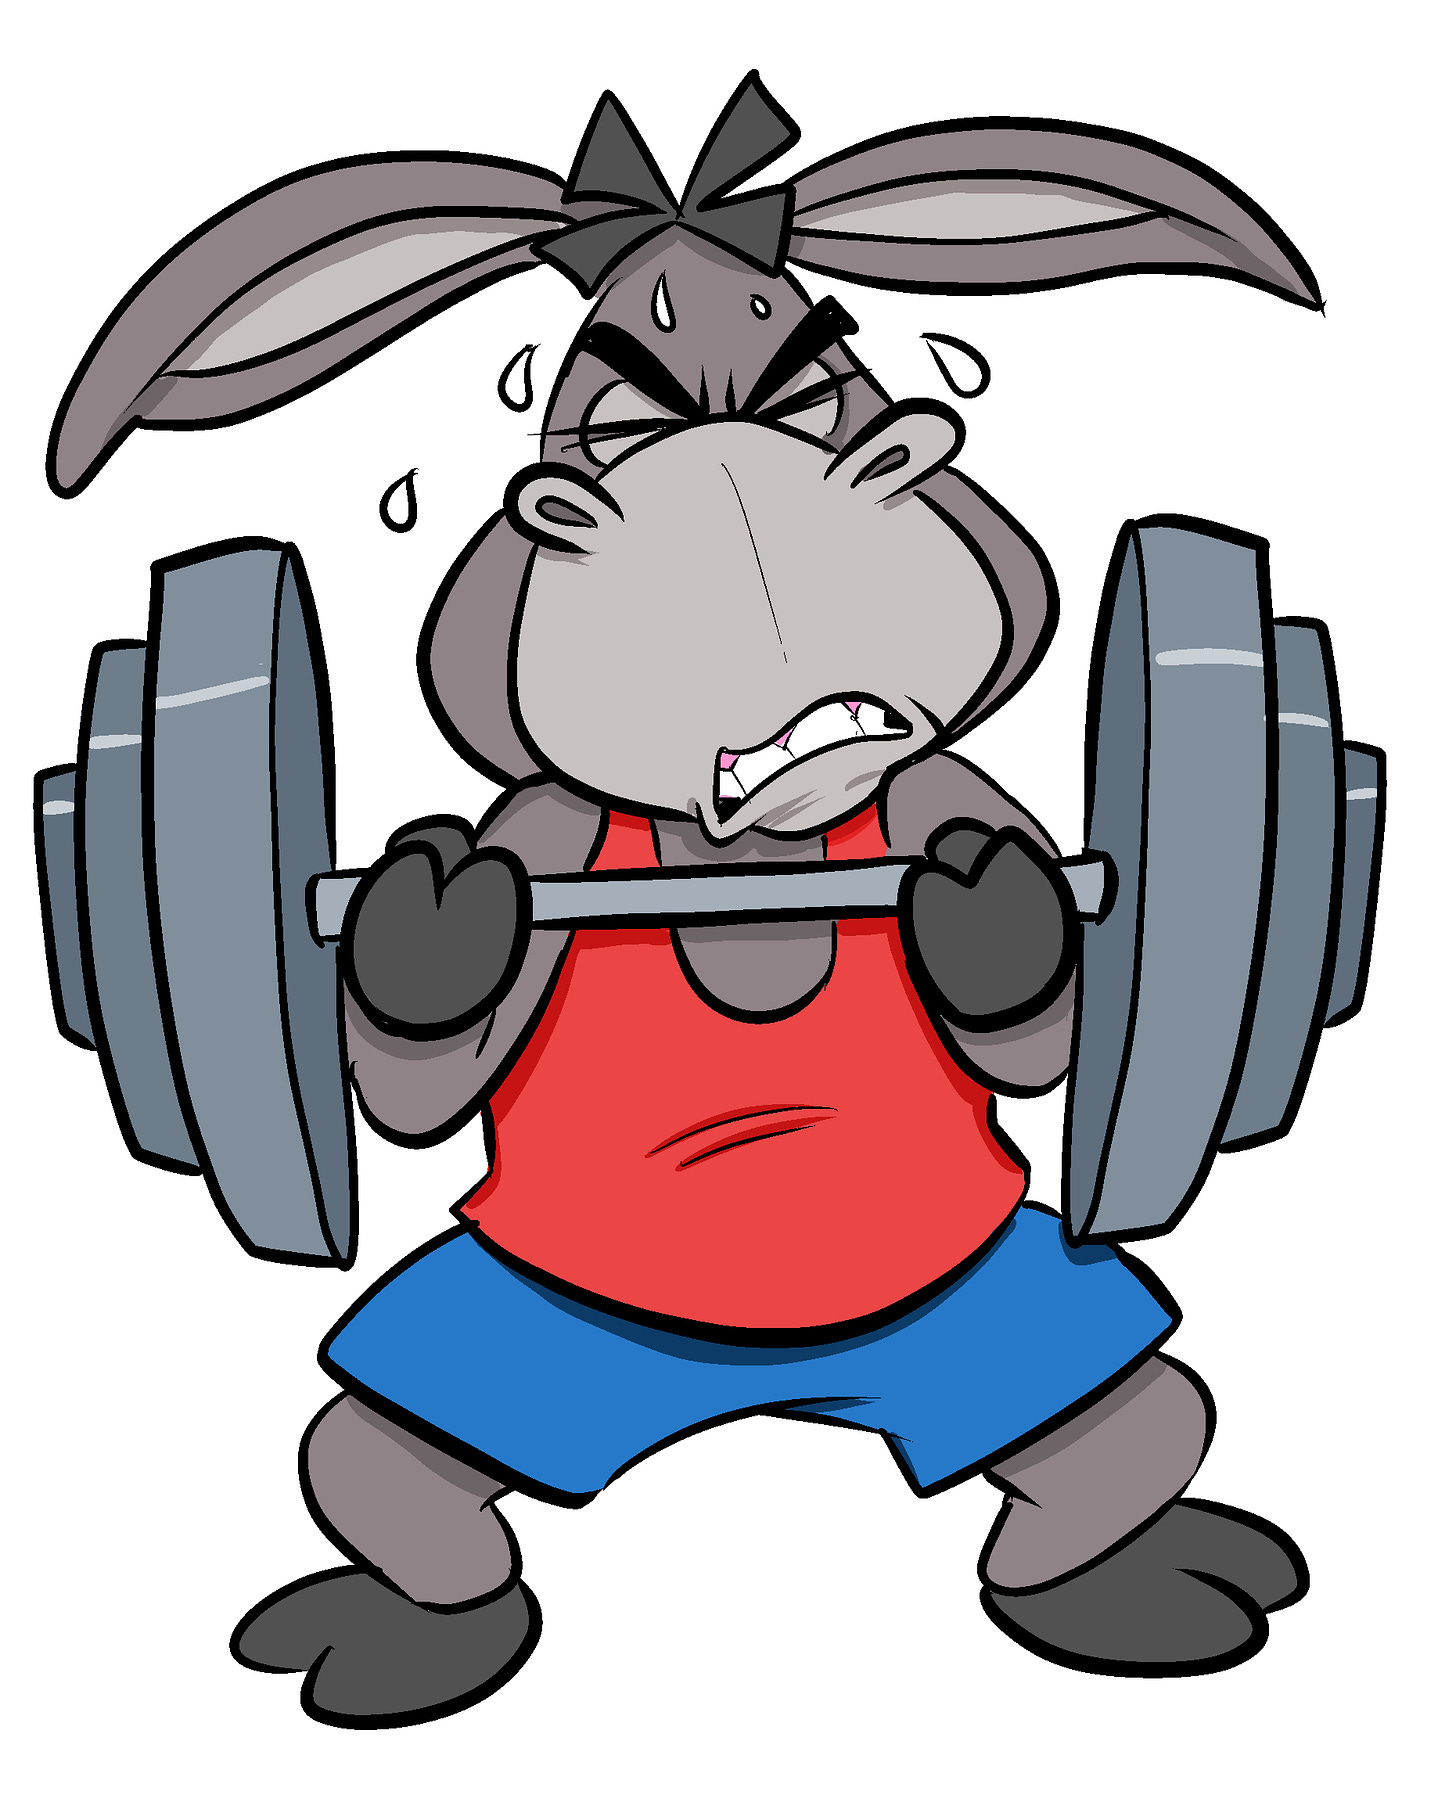 Hoté the Jackass Letters donkey mascot lifting weights.